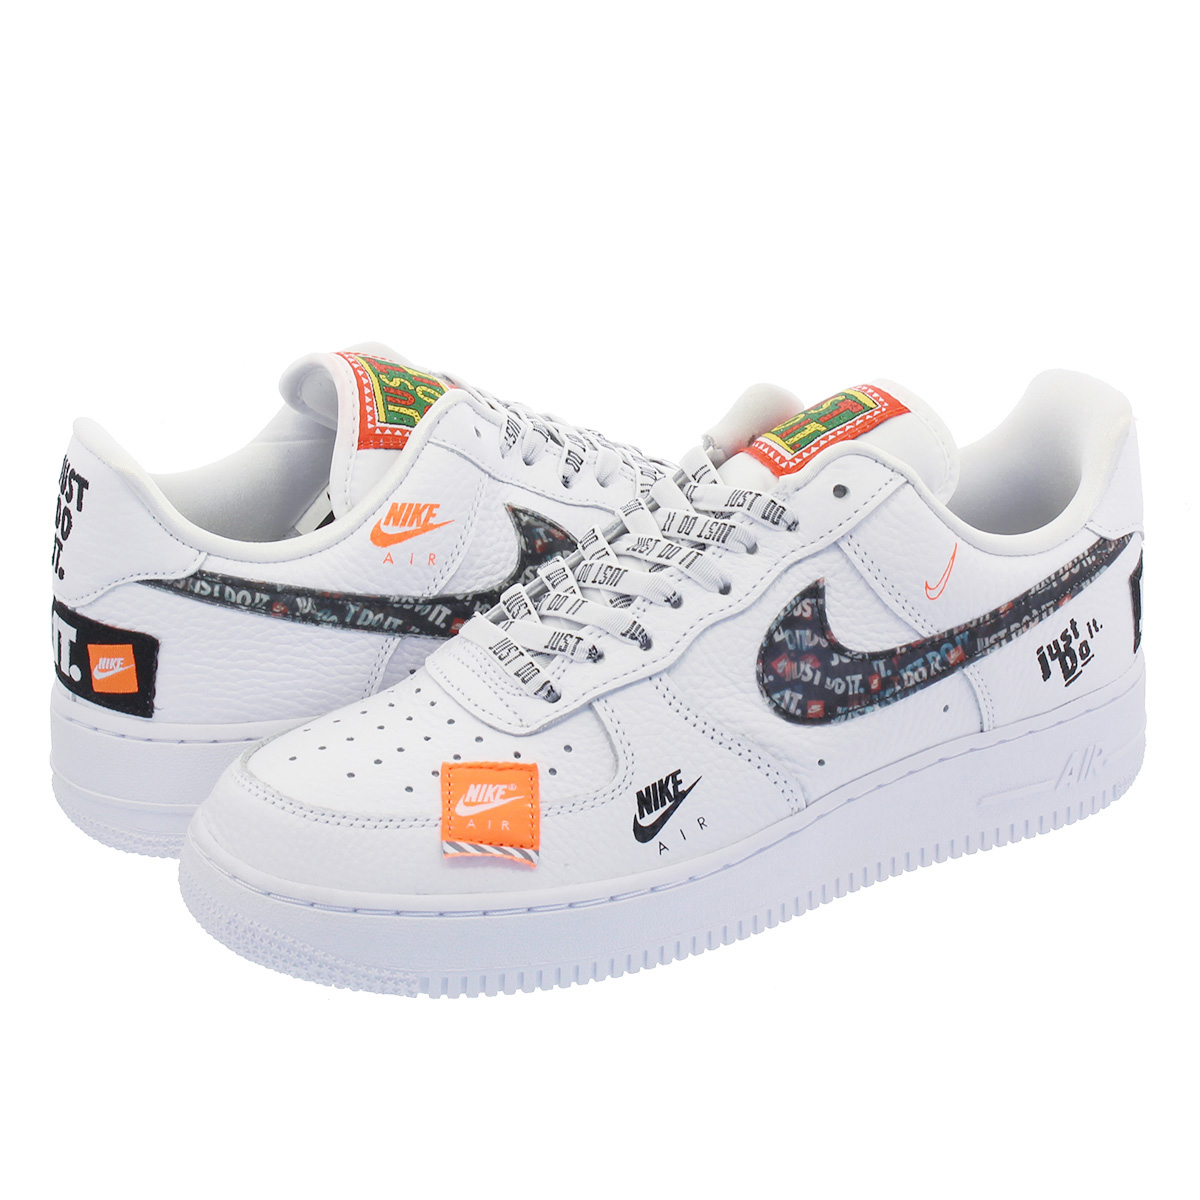 orange and white air force 1s